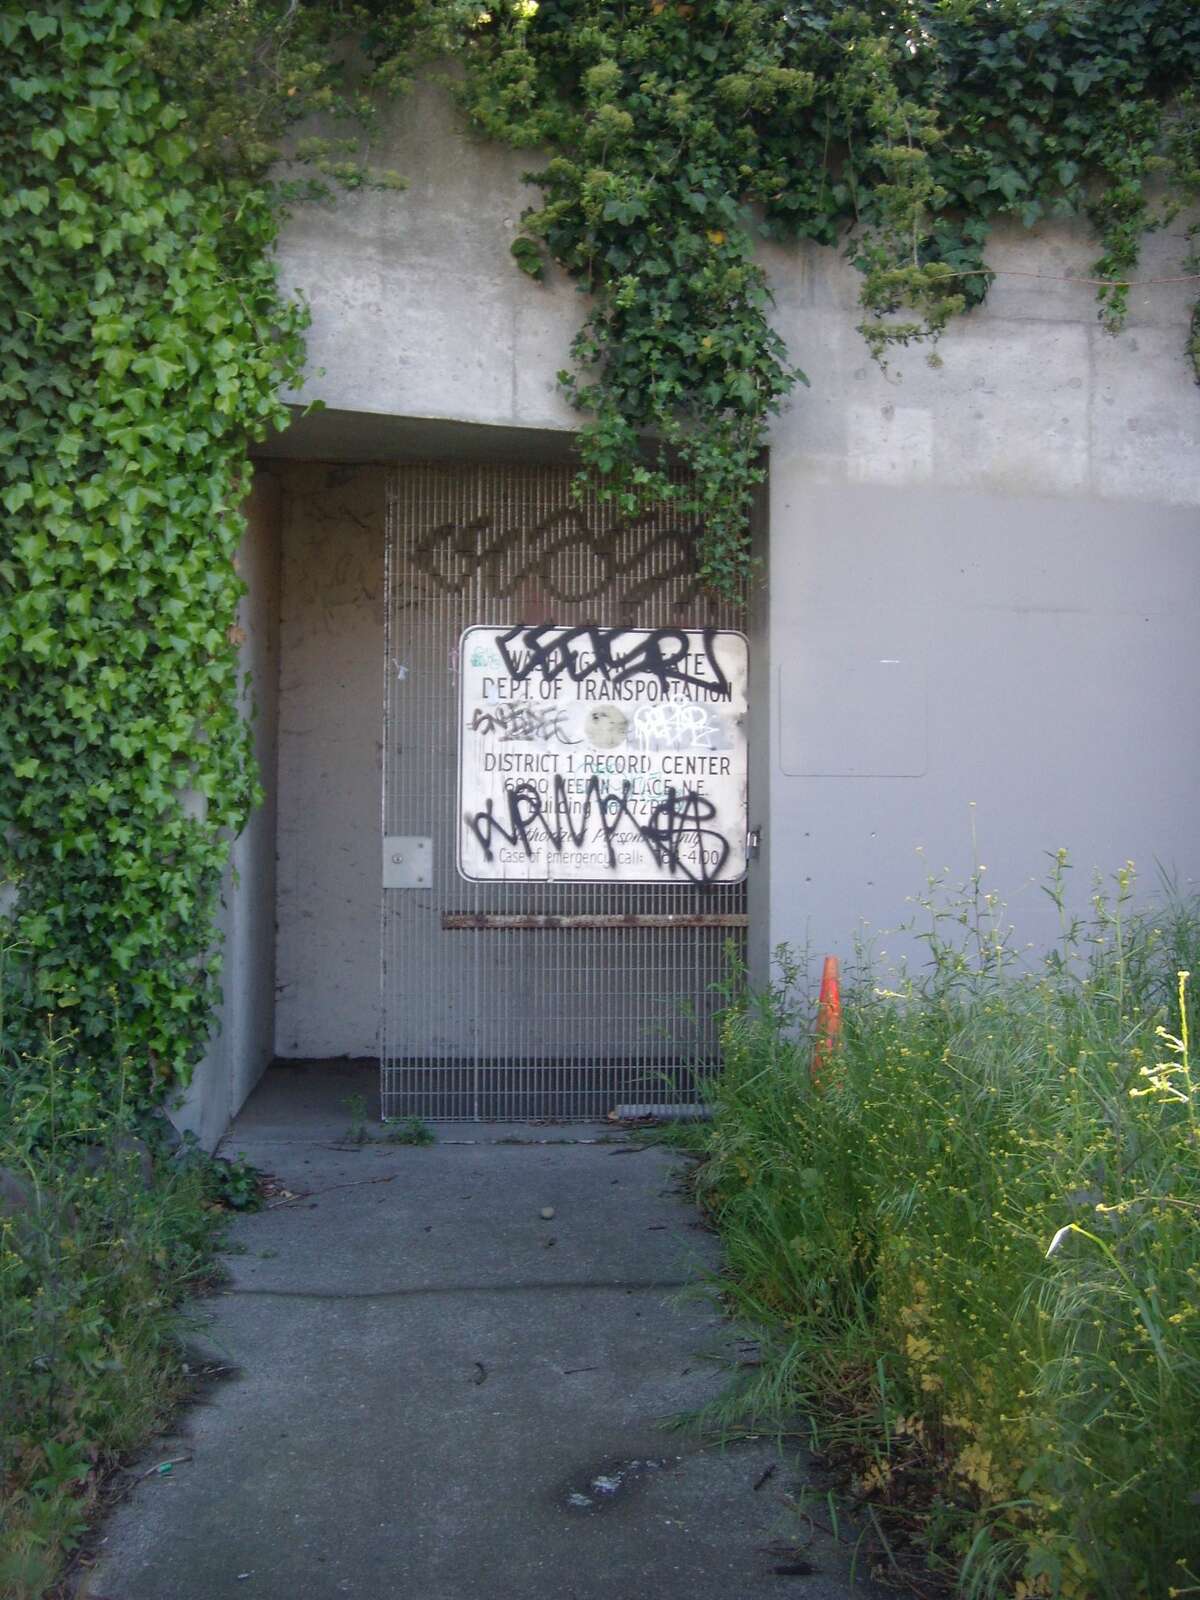 WSDOT's caption: If you've ever walked by this nondescript gate on Weedin Place in Seattle, you might have thought it was just another WSDOT storage facility. Inside, you'll find the only fallout shelter built into a highway anywhere in the nation.